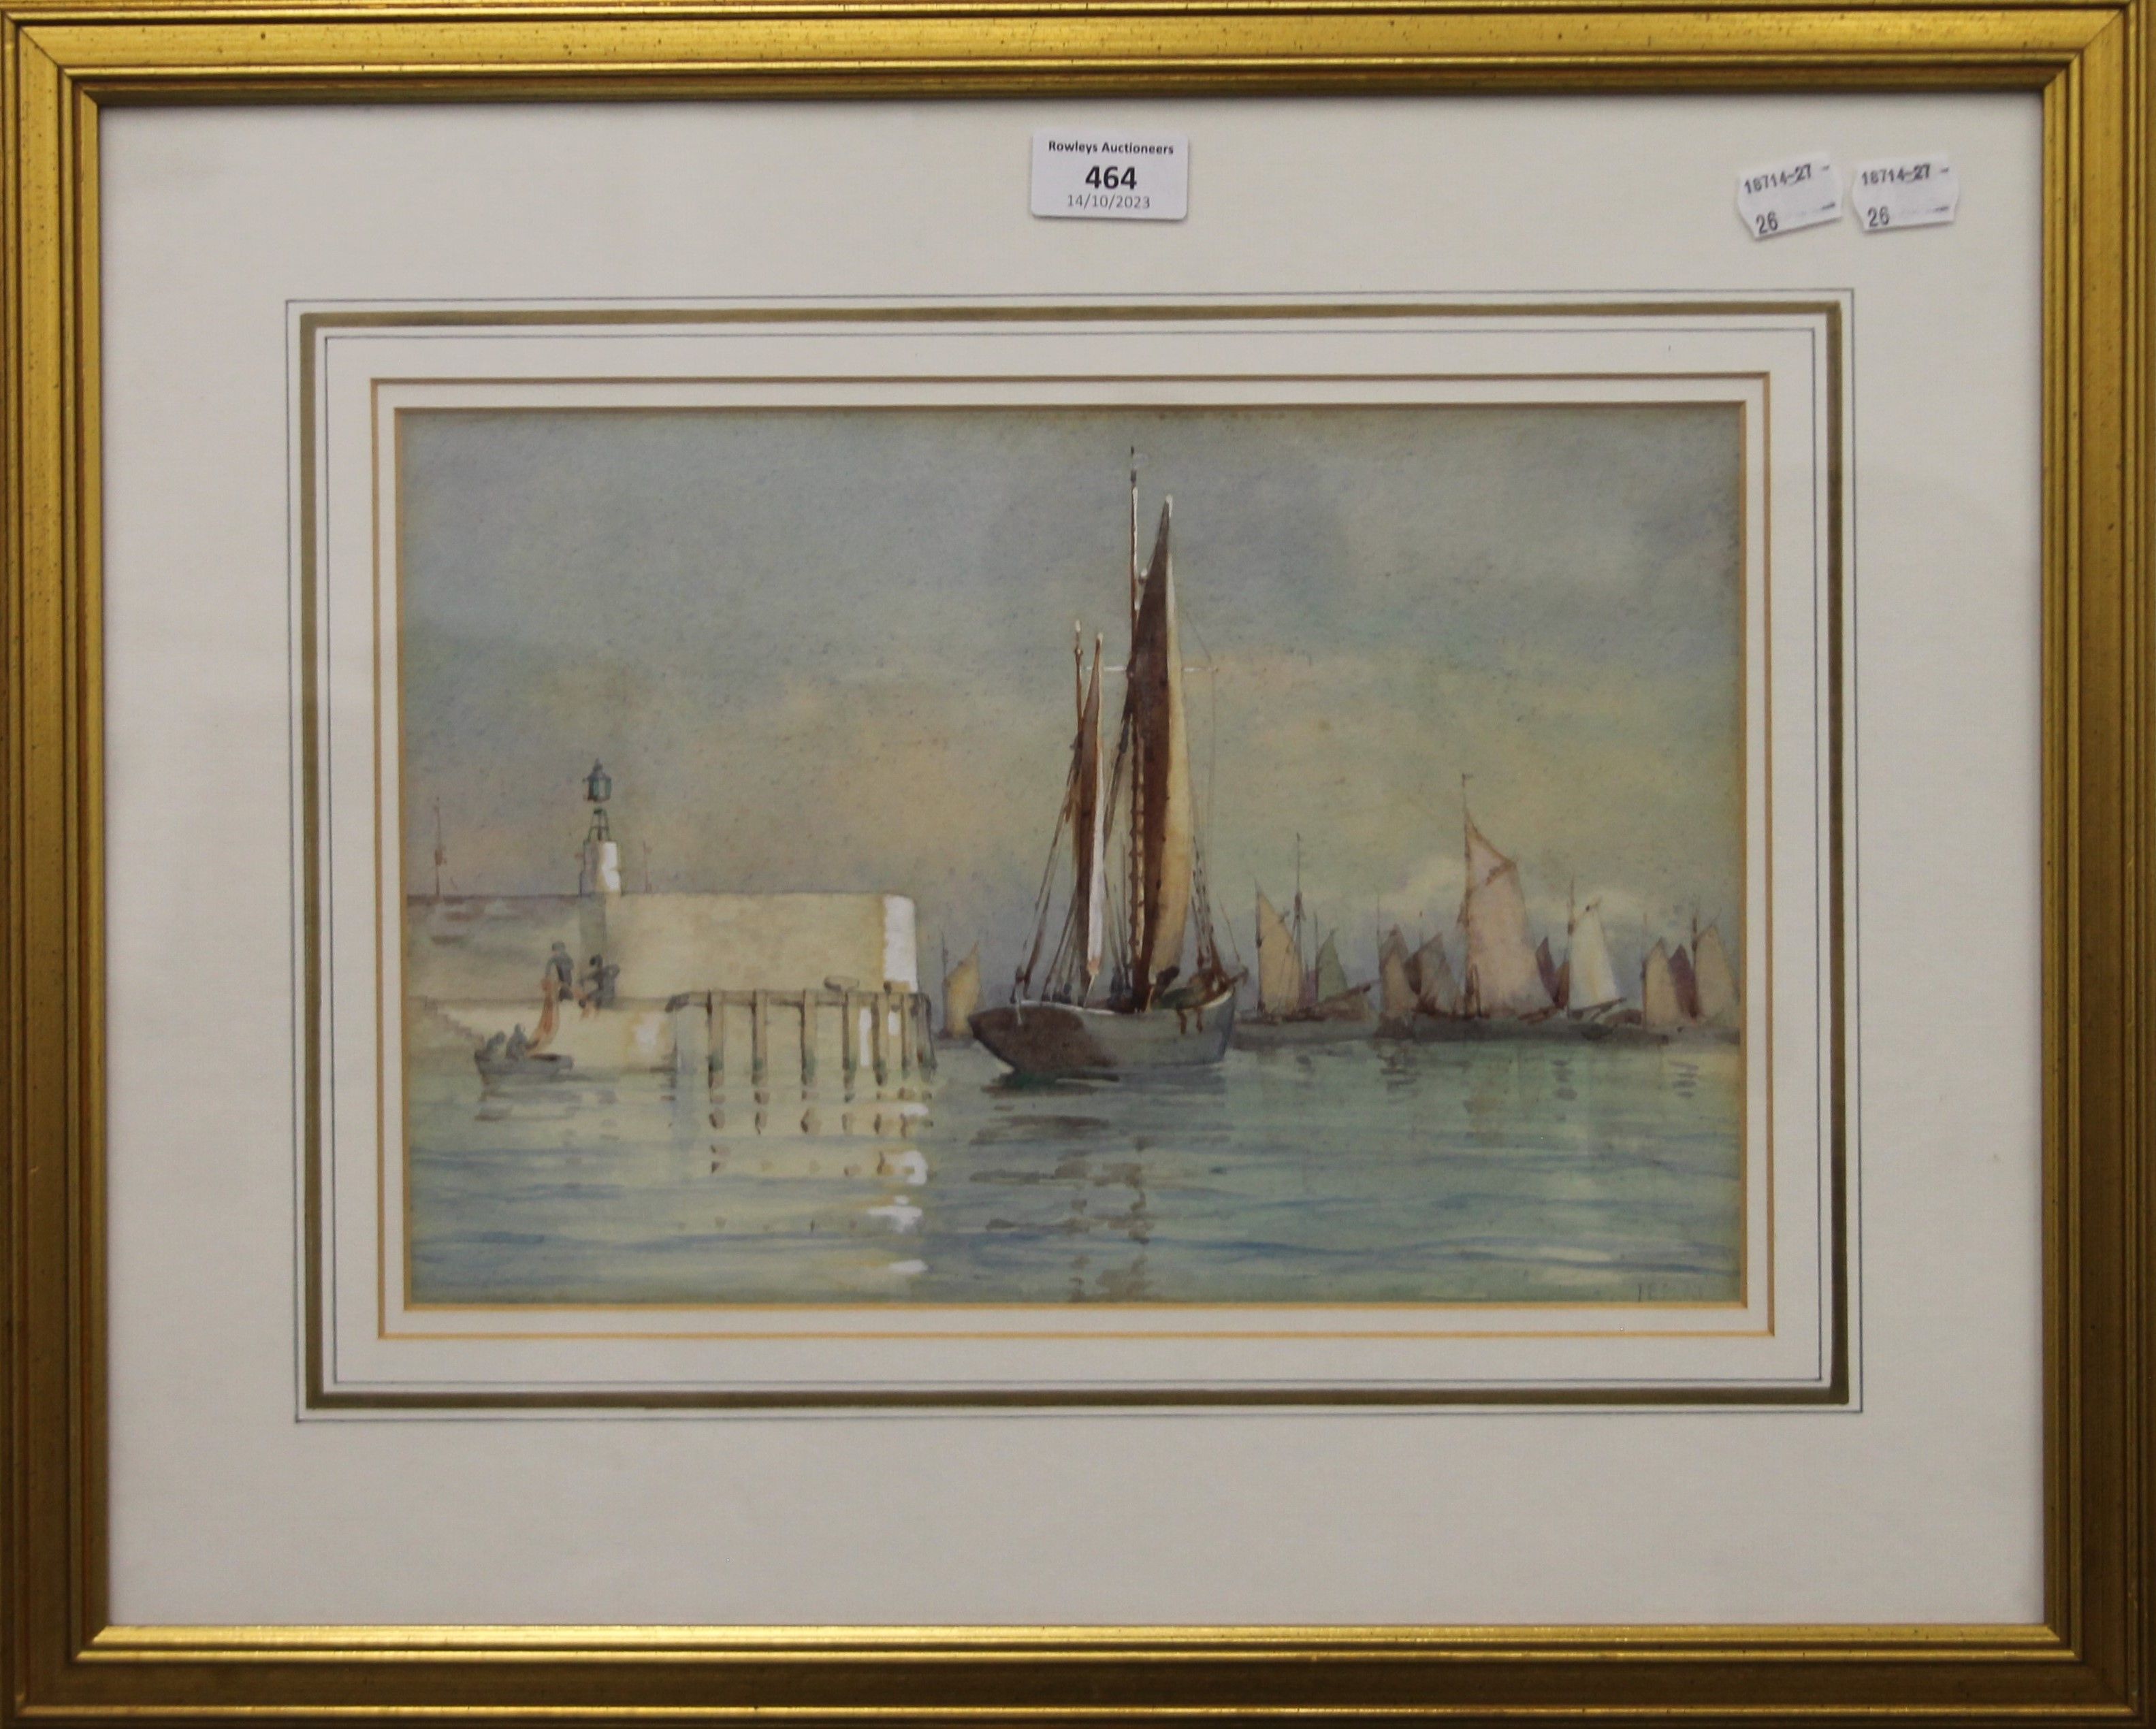 J E PLATT, Boats at a Harbour, watercolour, framed and glazed. 33 x 22 cm. - Image 2 of 3